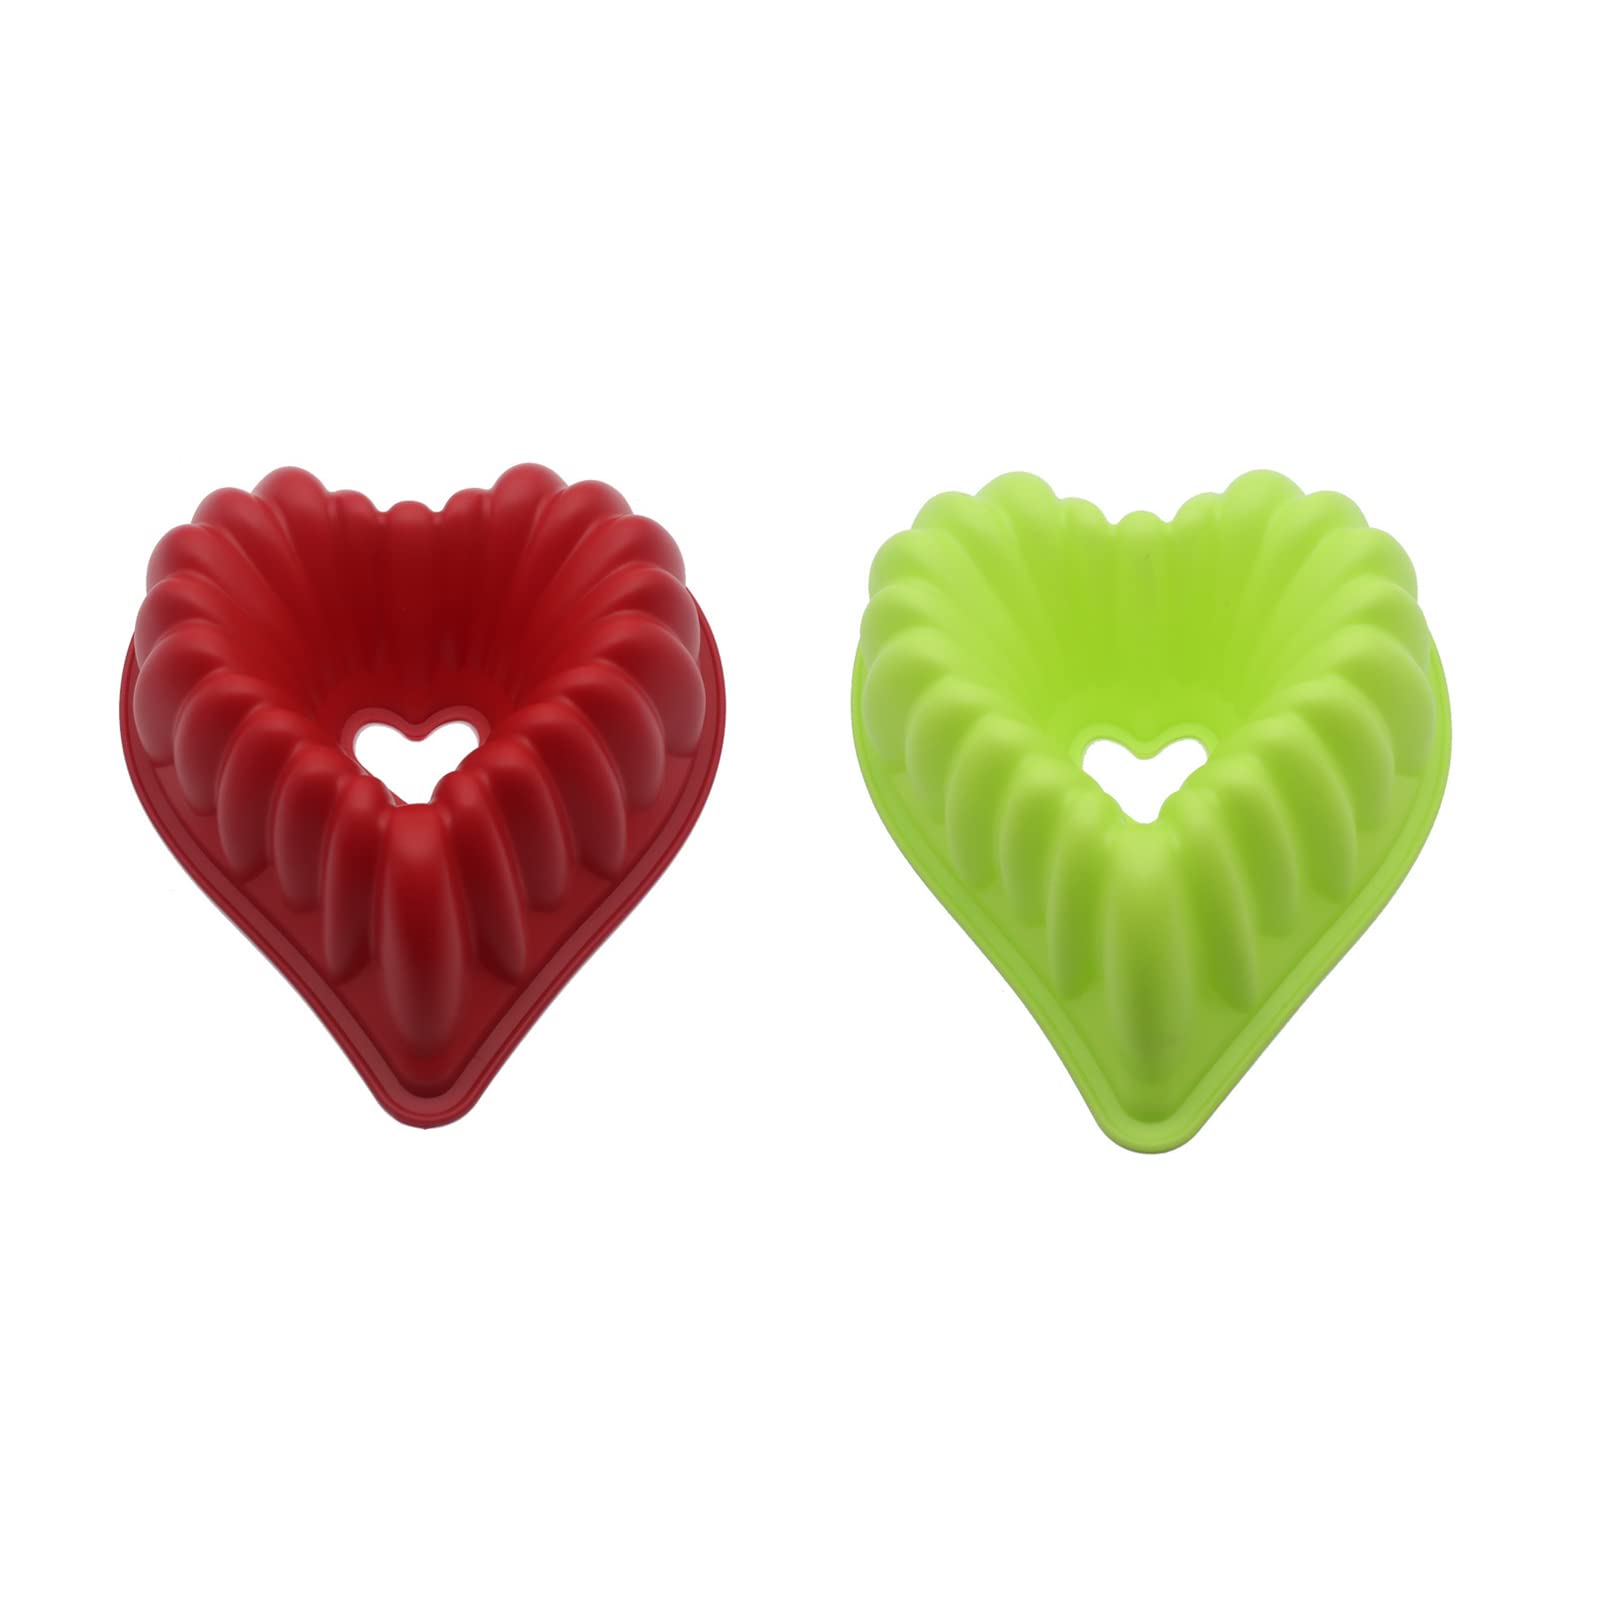 Silicone Cake Pan Nonstick Silicone Heart Shaped Cake Pan Silicone Cake Molds For Baking For Cake Bread Baking Mold Silicone Cake Pan For Baking Cake Molds Pan For Baking Shapes Silicone Silicone Pans